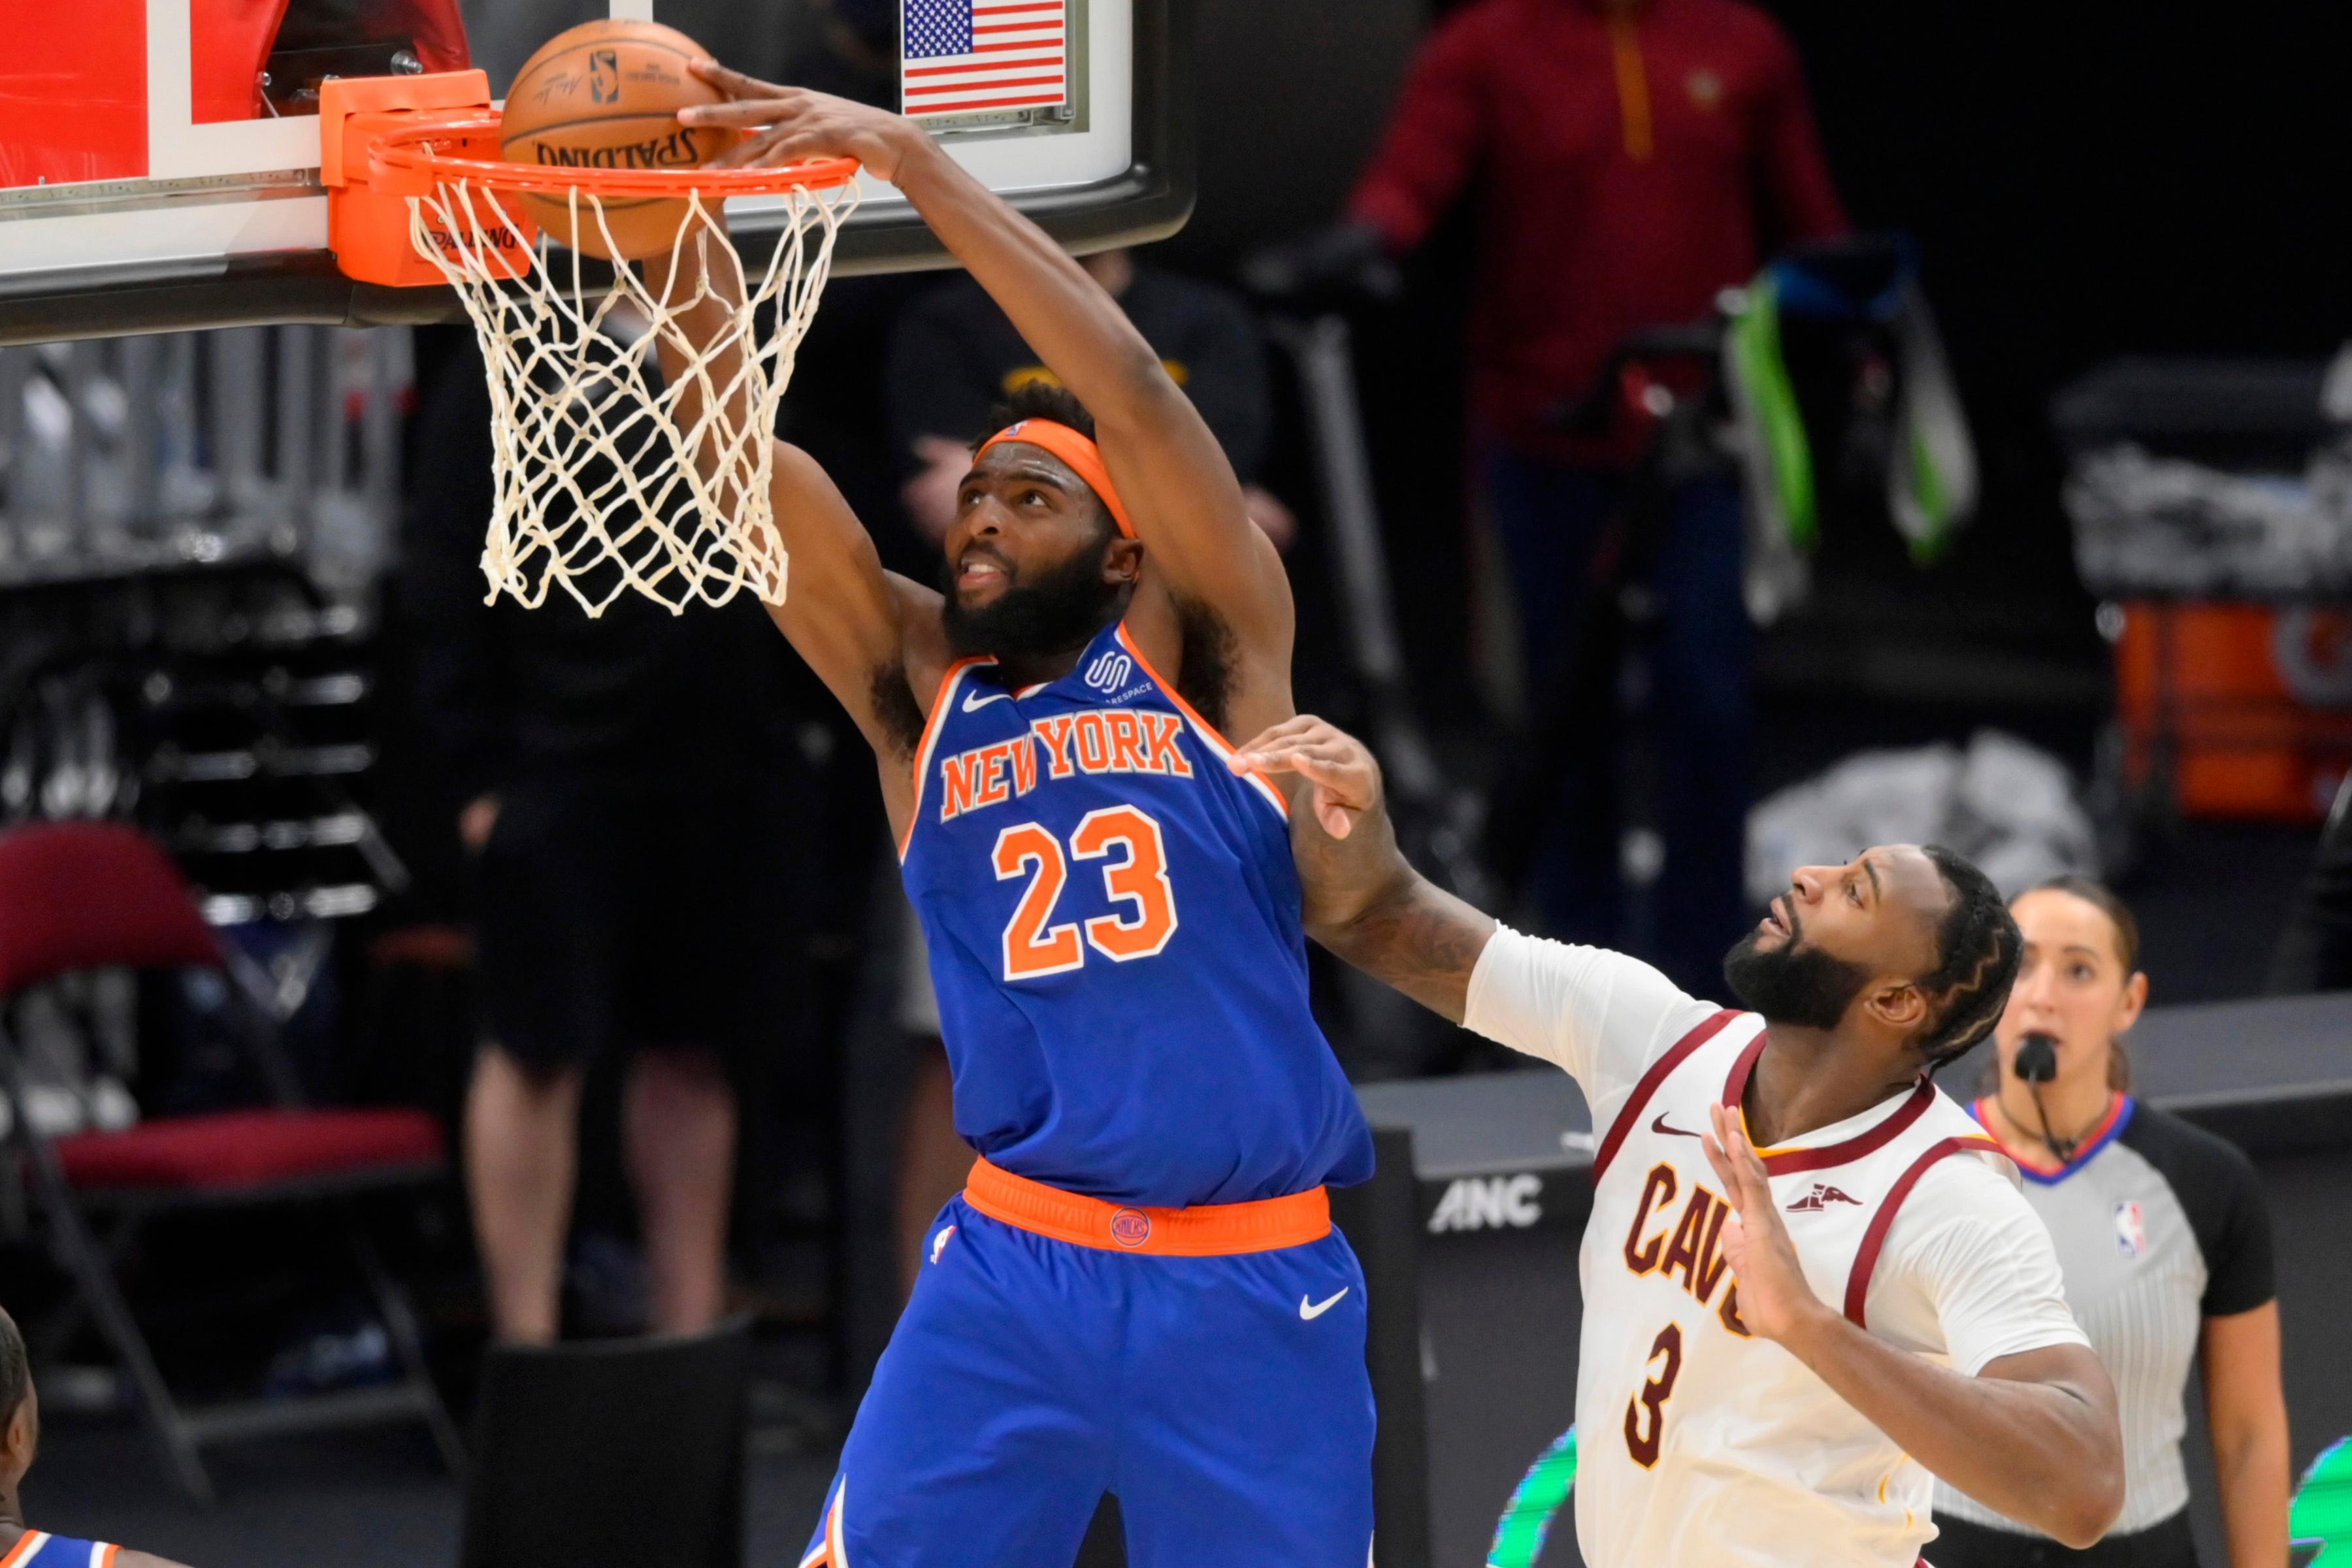 Dec 29, 2020; Cleveland, Ohio, USA; New York Knicks center Mitchell Robinson (23) dunks against Cleveland Cavaliers center Andre Drummond (3) in the fourth quarter at Rocket Mortgage FieldHouse. Mandatory Credit: David Richard-USA TODAY Sports / © David Richard-USA TODAY Sports